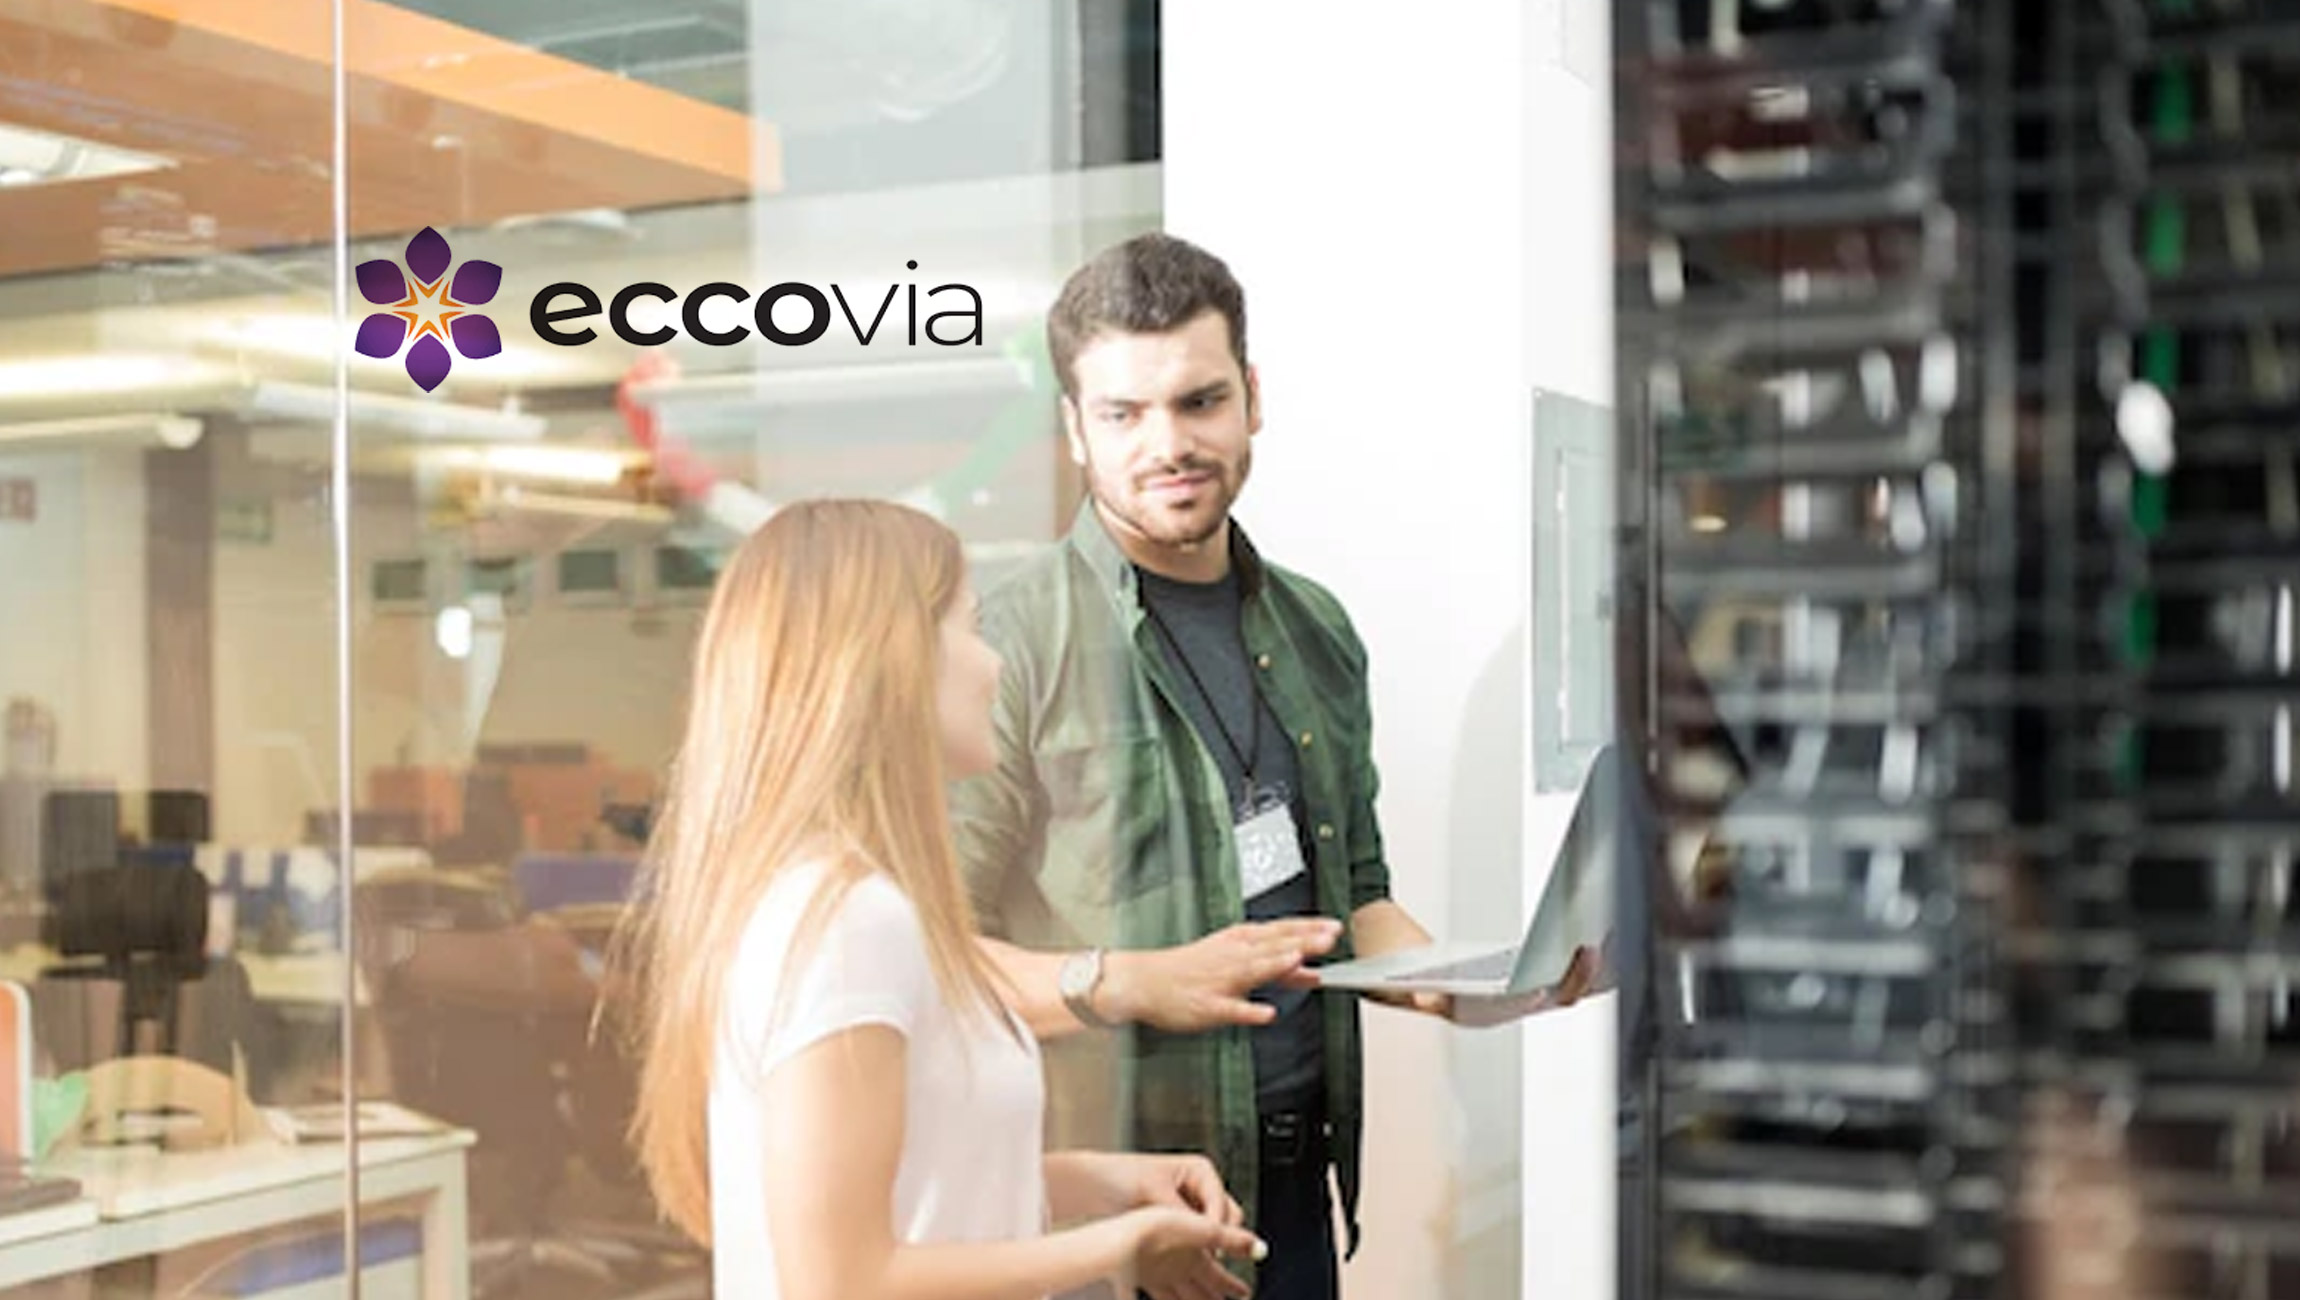 Eccovia Launches ClientInsight, an AI-Powered Data Warehouse to Improve Social Service Delivery